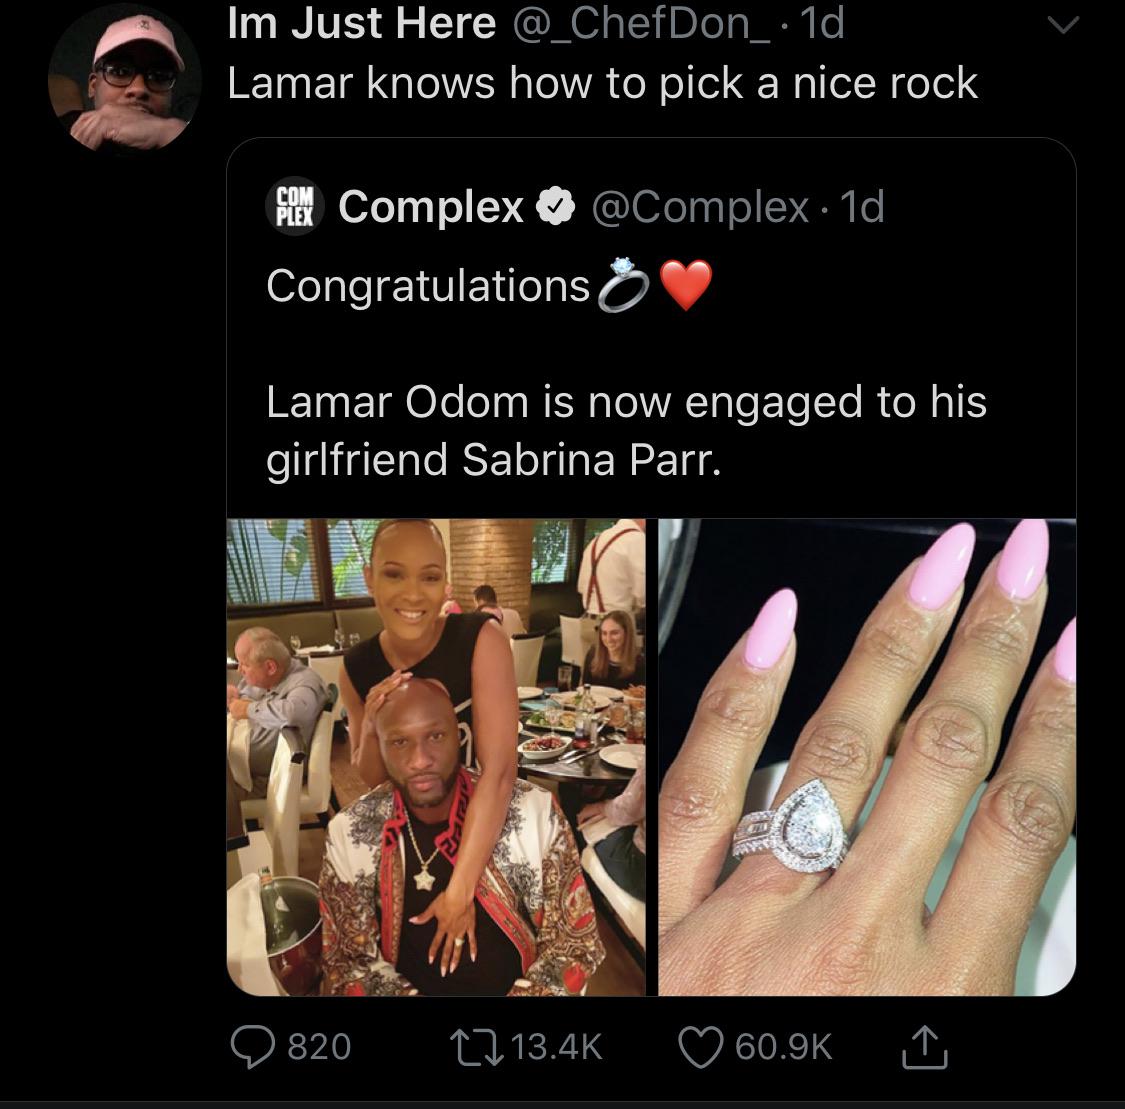 nail - Im Just Here . 1d Lamar knows how to pick a nice rock Son Complex 1d Congratulations Lamar Odom is now engaged to his girlfriend Sabrina Parr. D 820 .